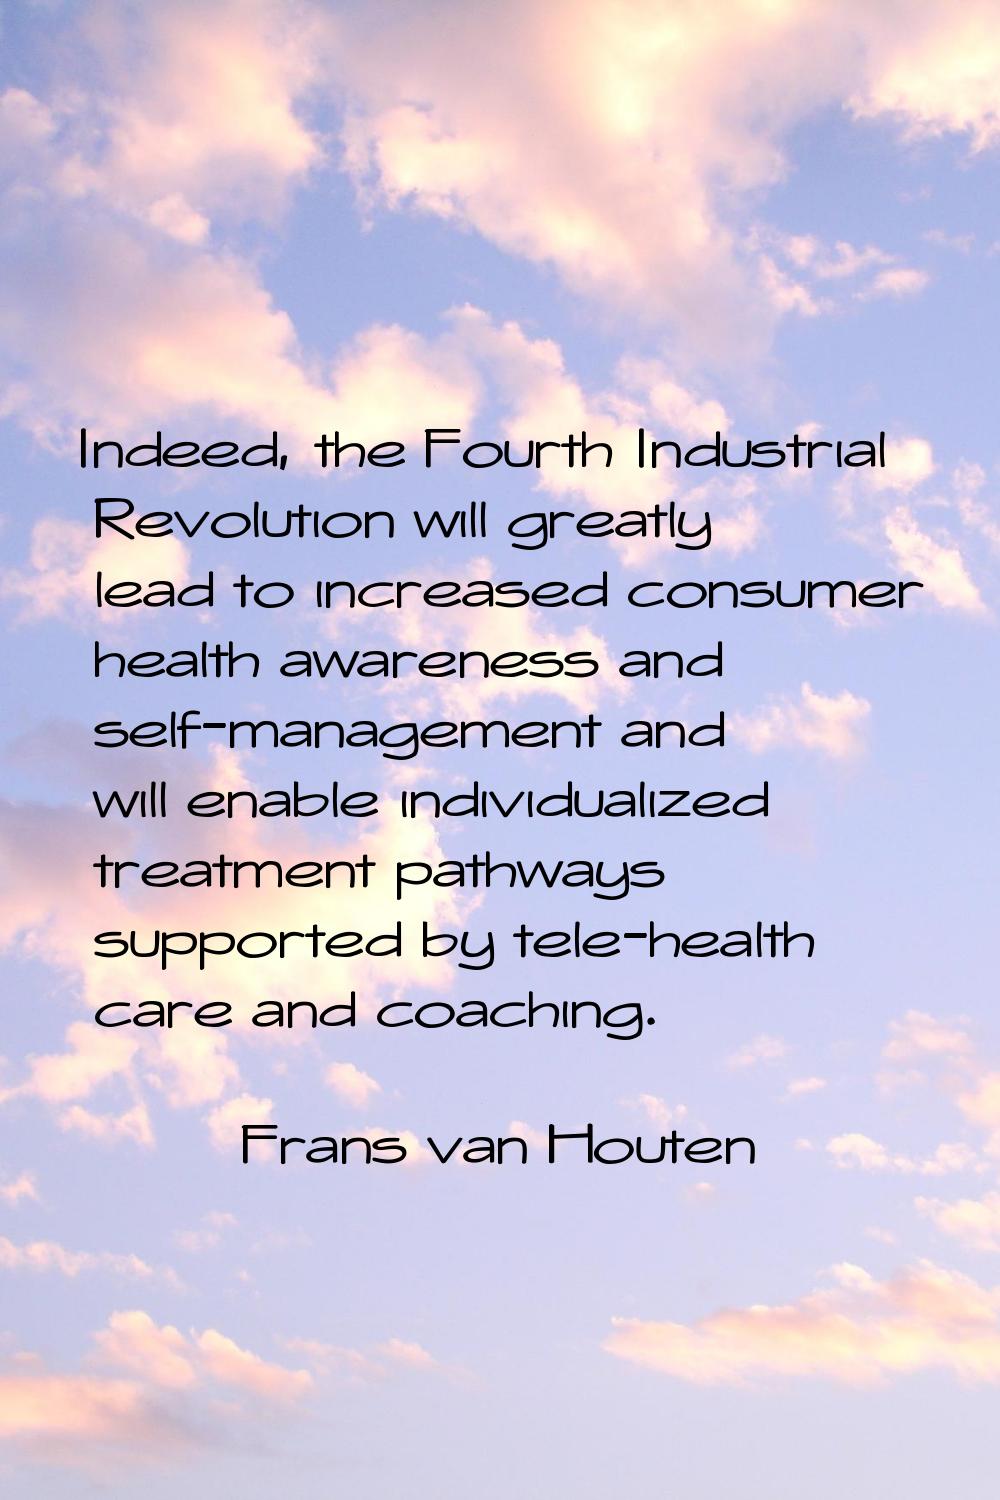 Indeed, the Fourth Industrial Revolution will greatly lead to increased consumer health awareness a